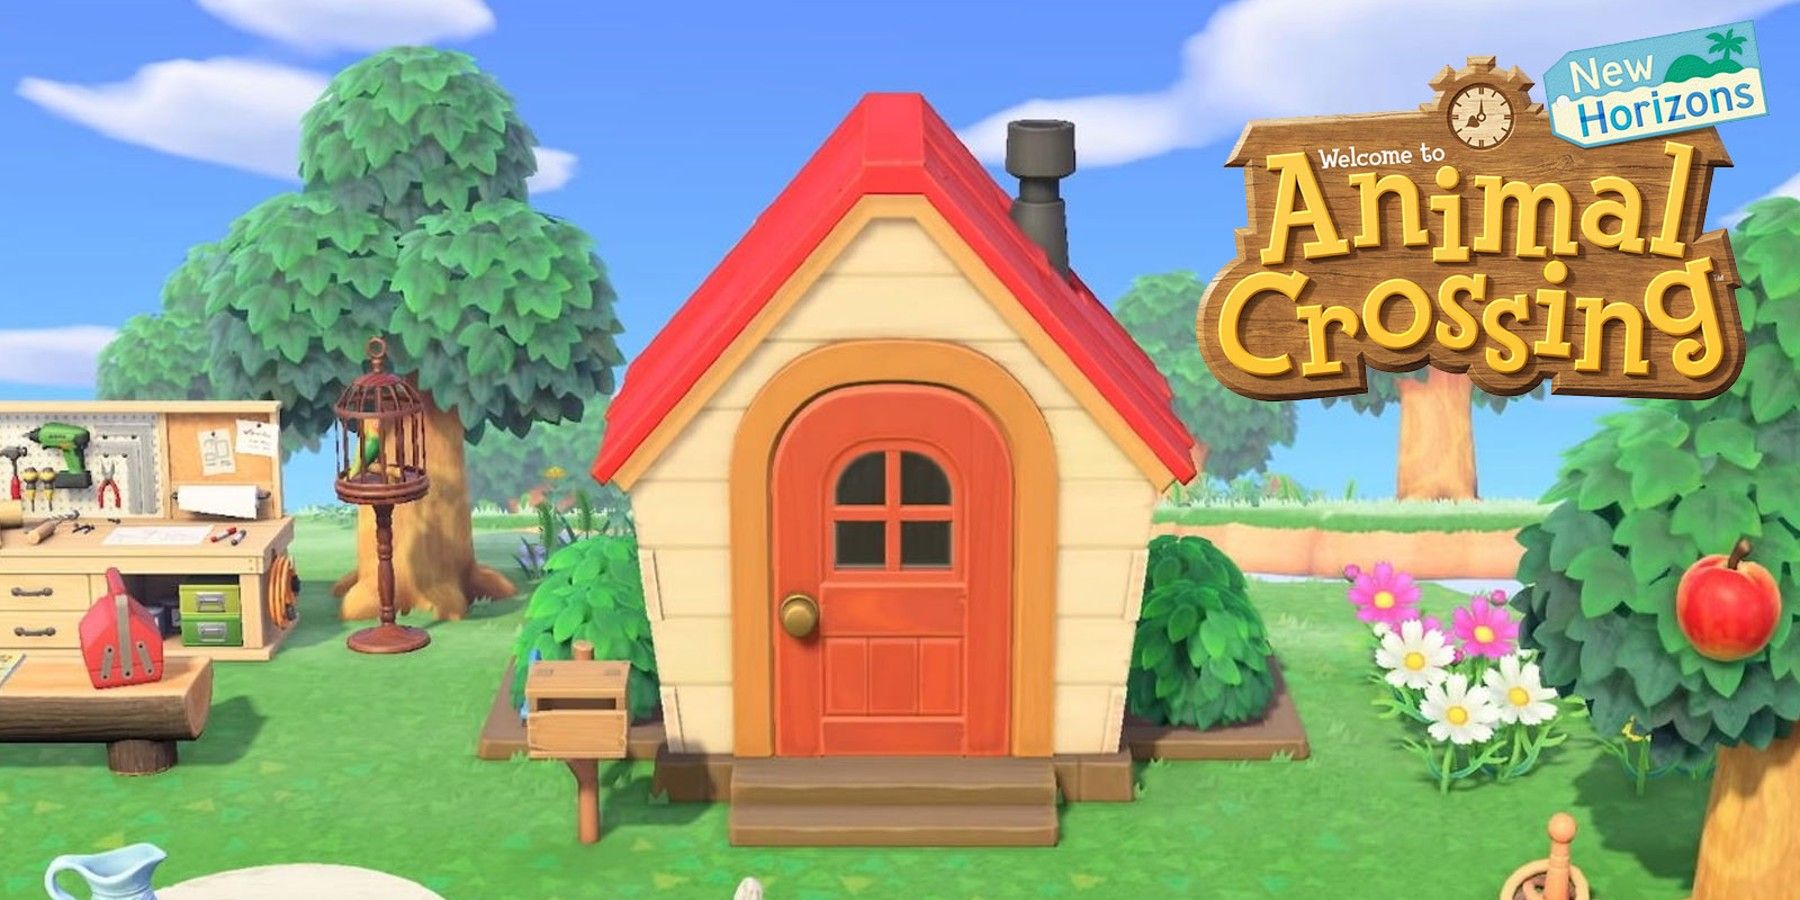 Baker Makes Incredible Animal Crossing New Horizons Birthday Cake for Their Daughter